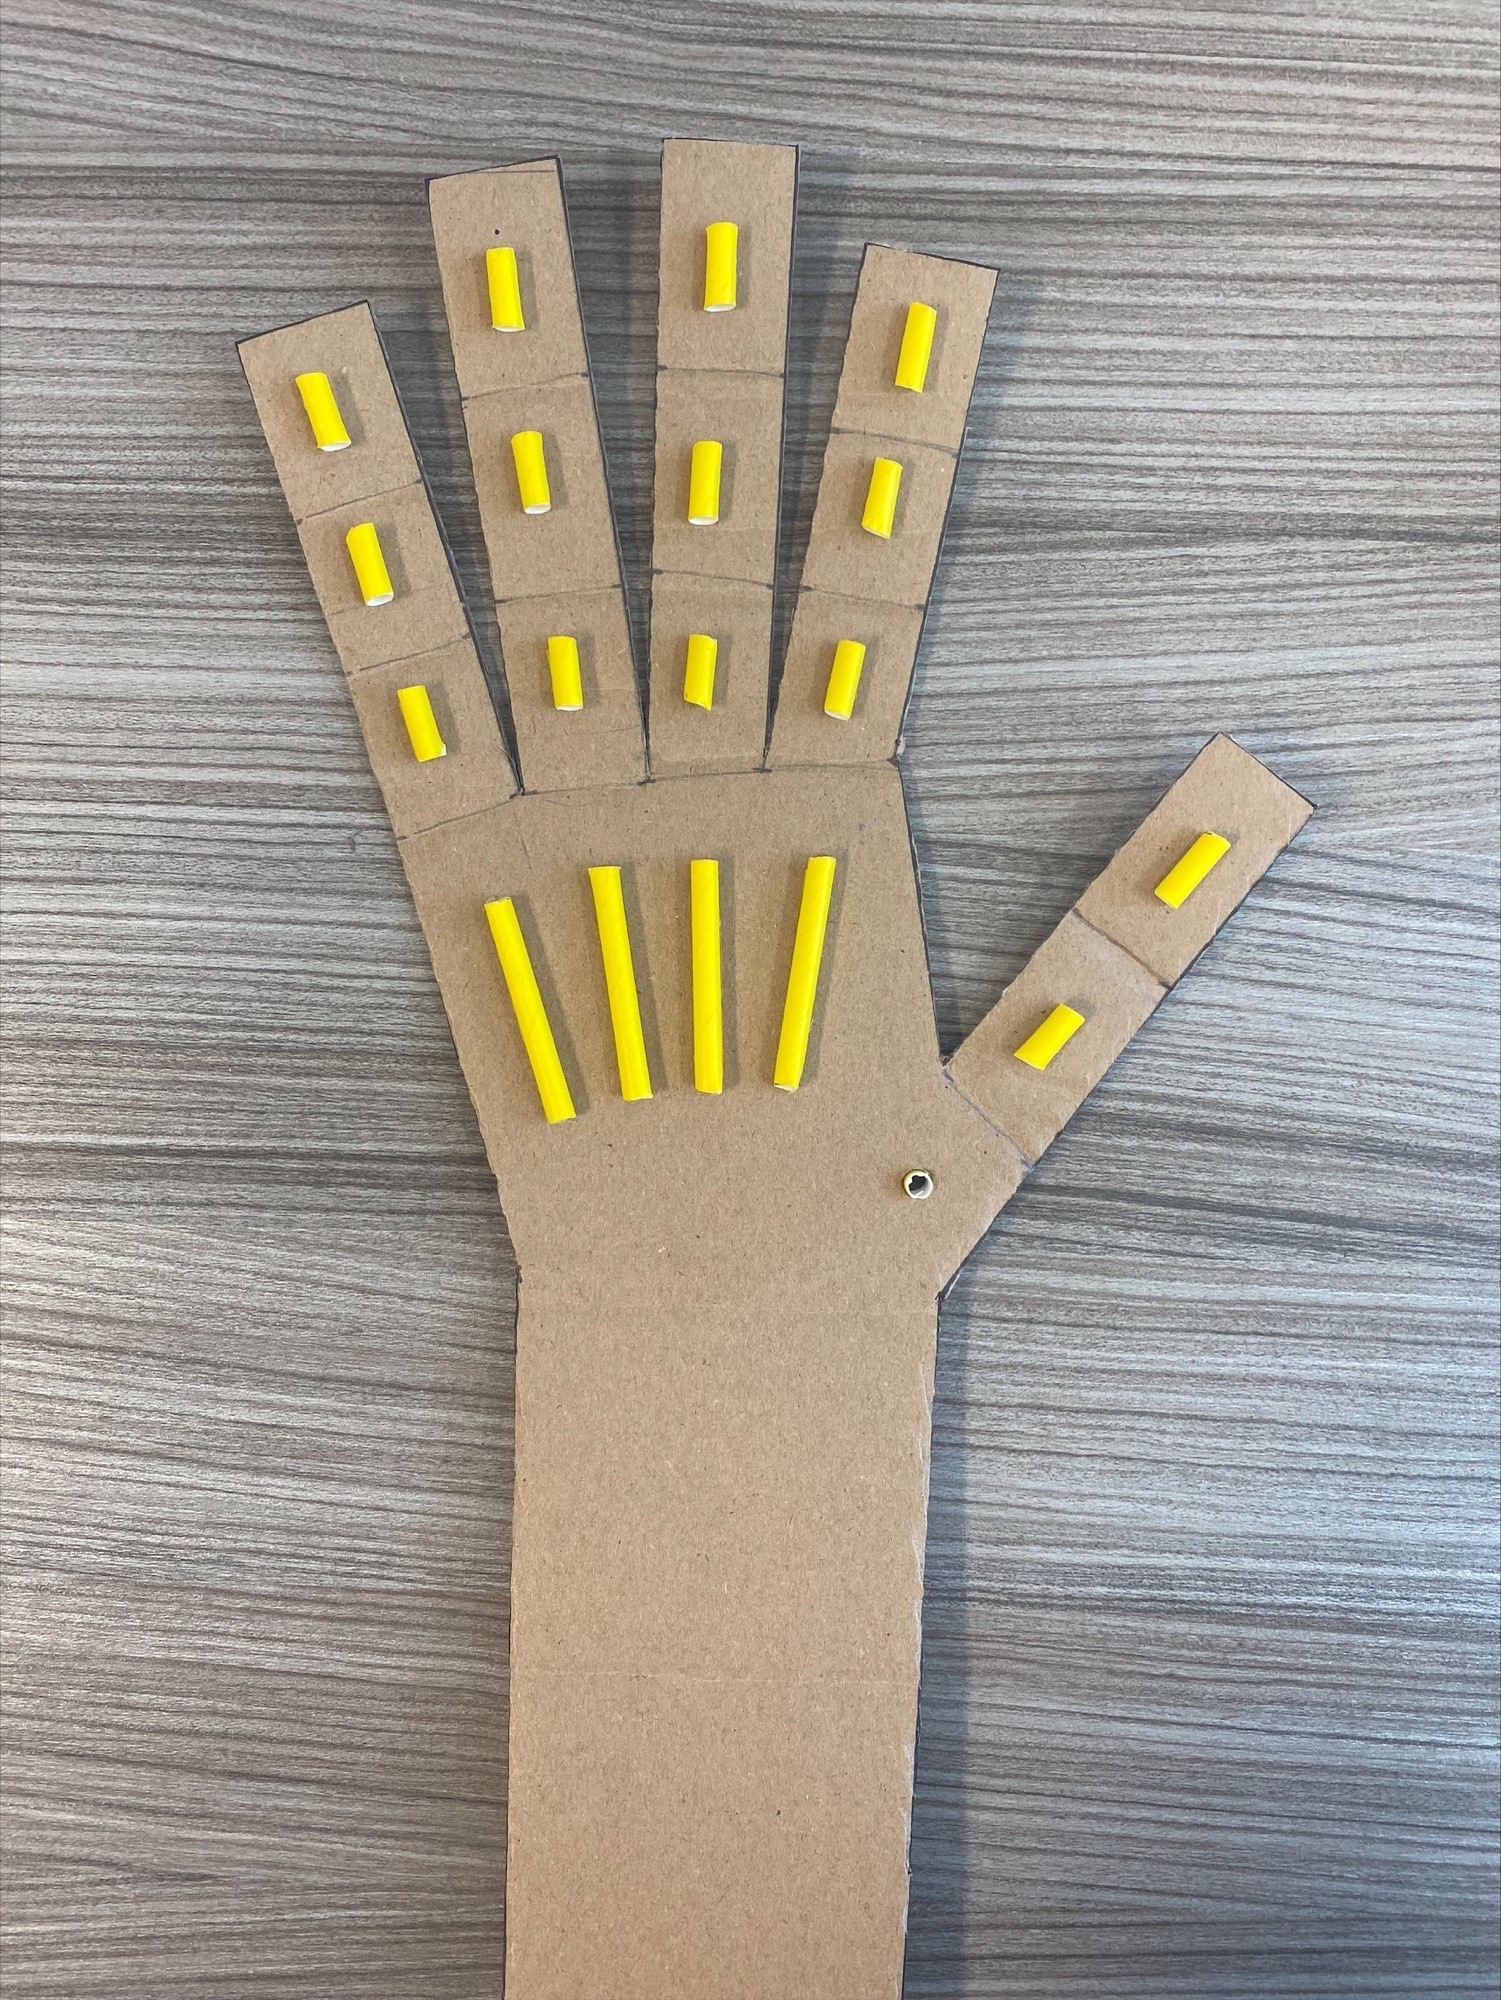 Straws are stuck to cardboard finger bands, with PVA glue